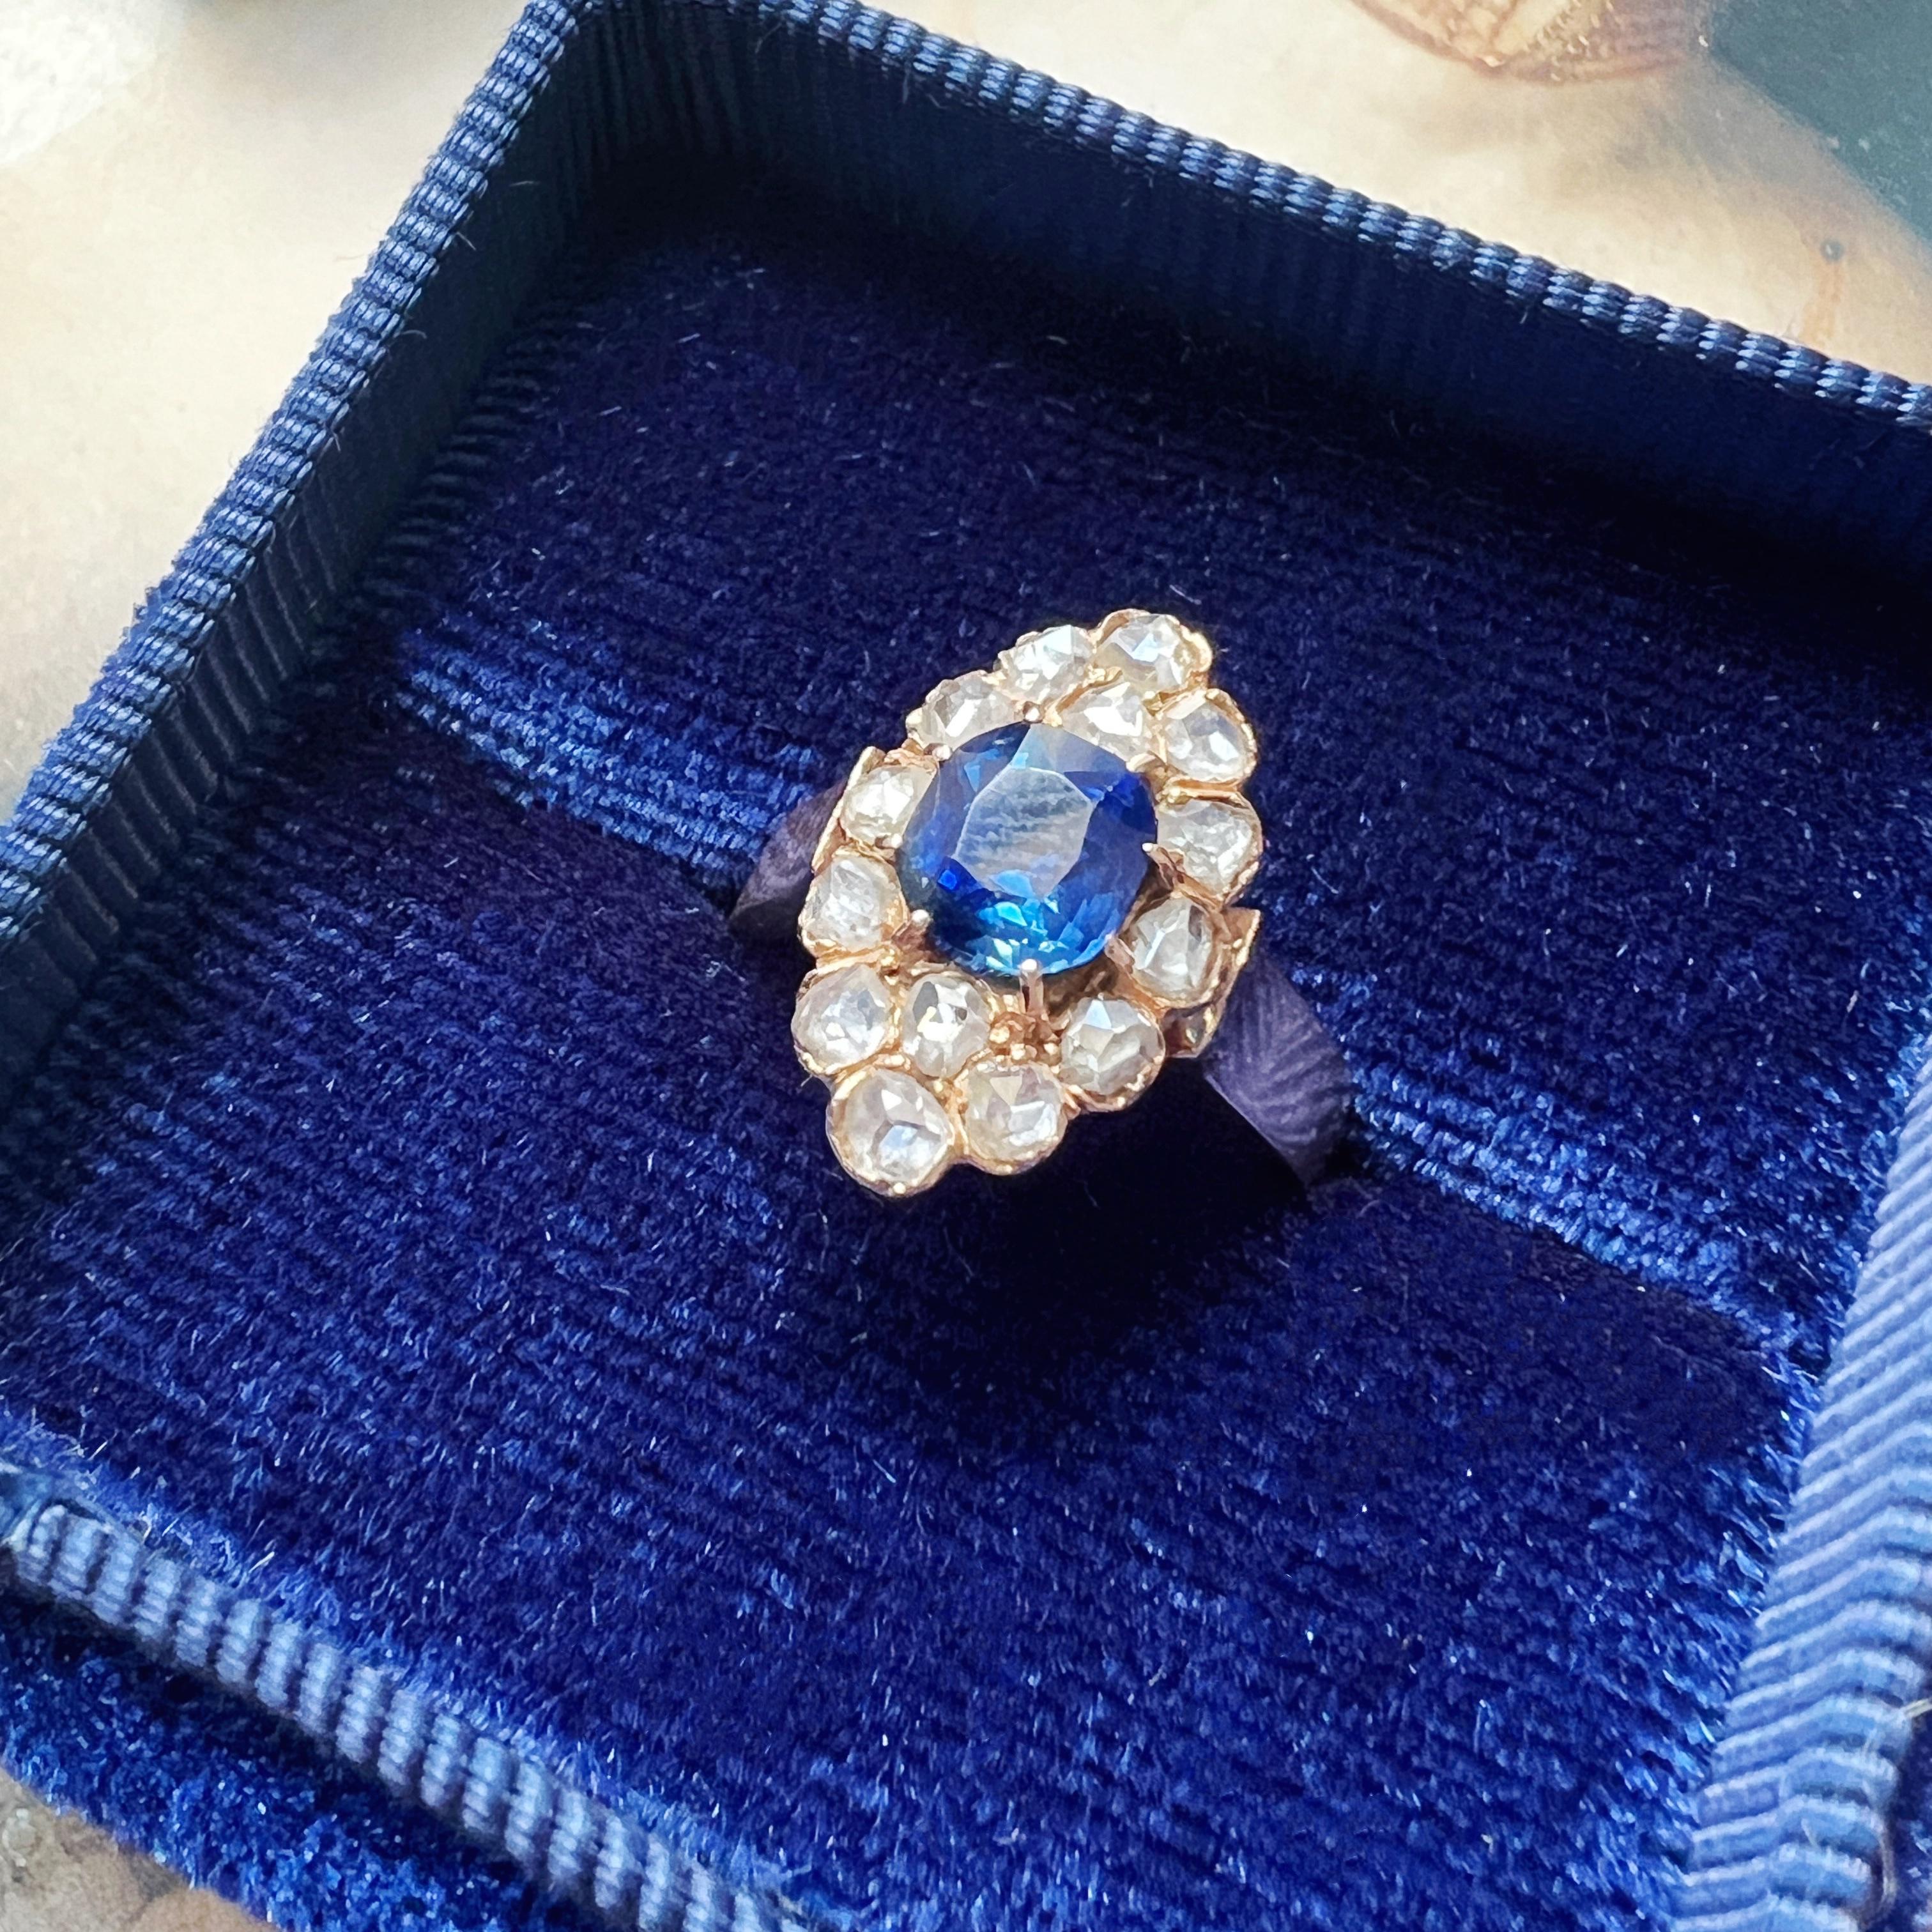 Antique certified natural unheated blue sapphire diamond ring 1